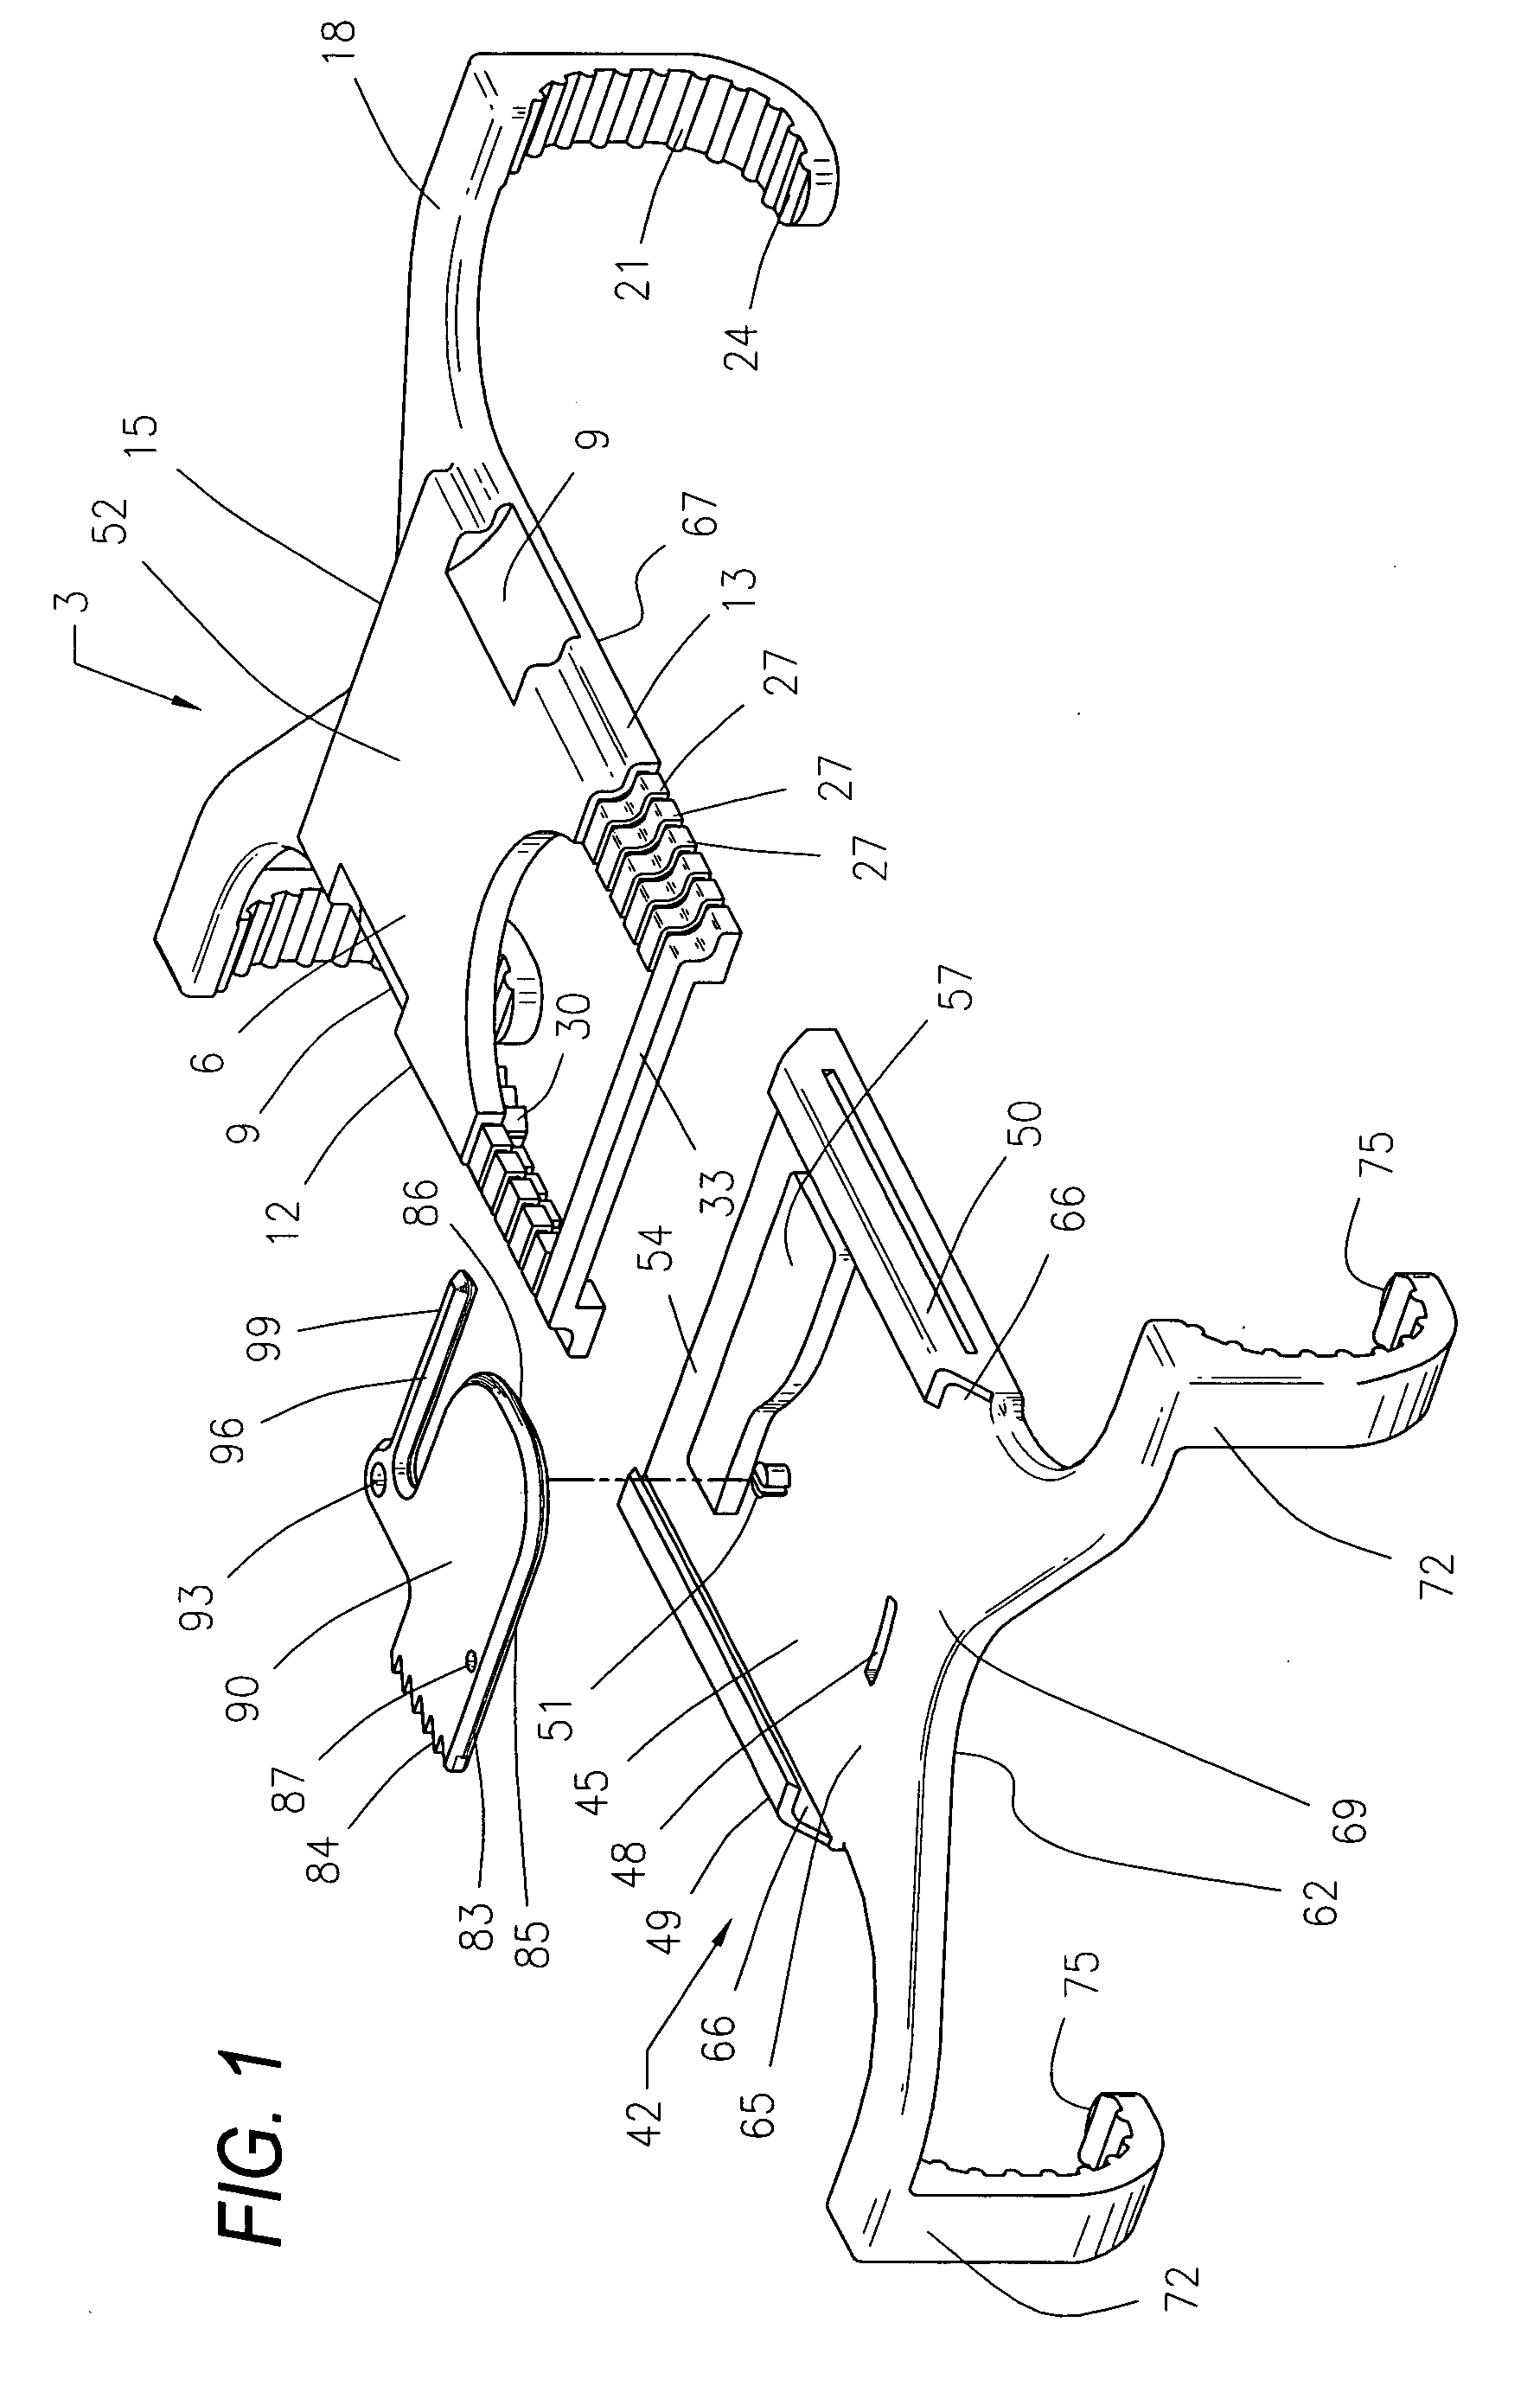 Surgical device for capturing, positioning and aligning portions of a horizontally severed human sternum